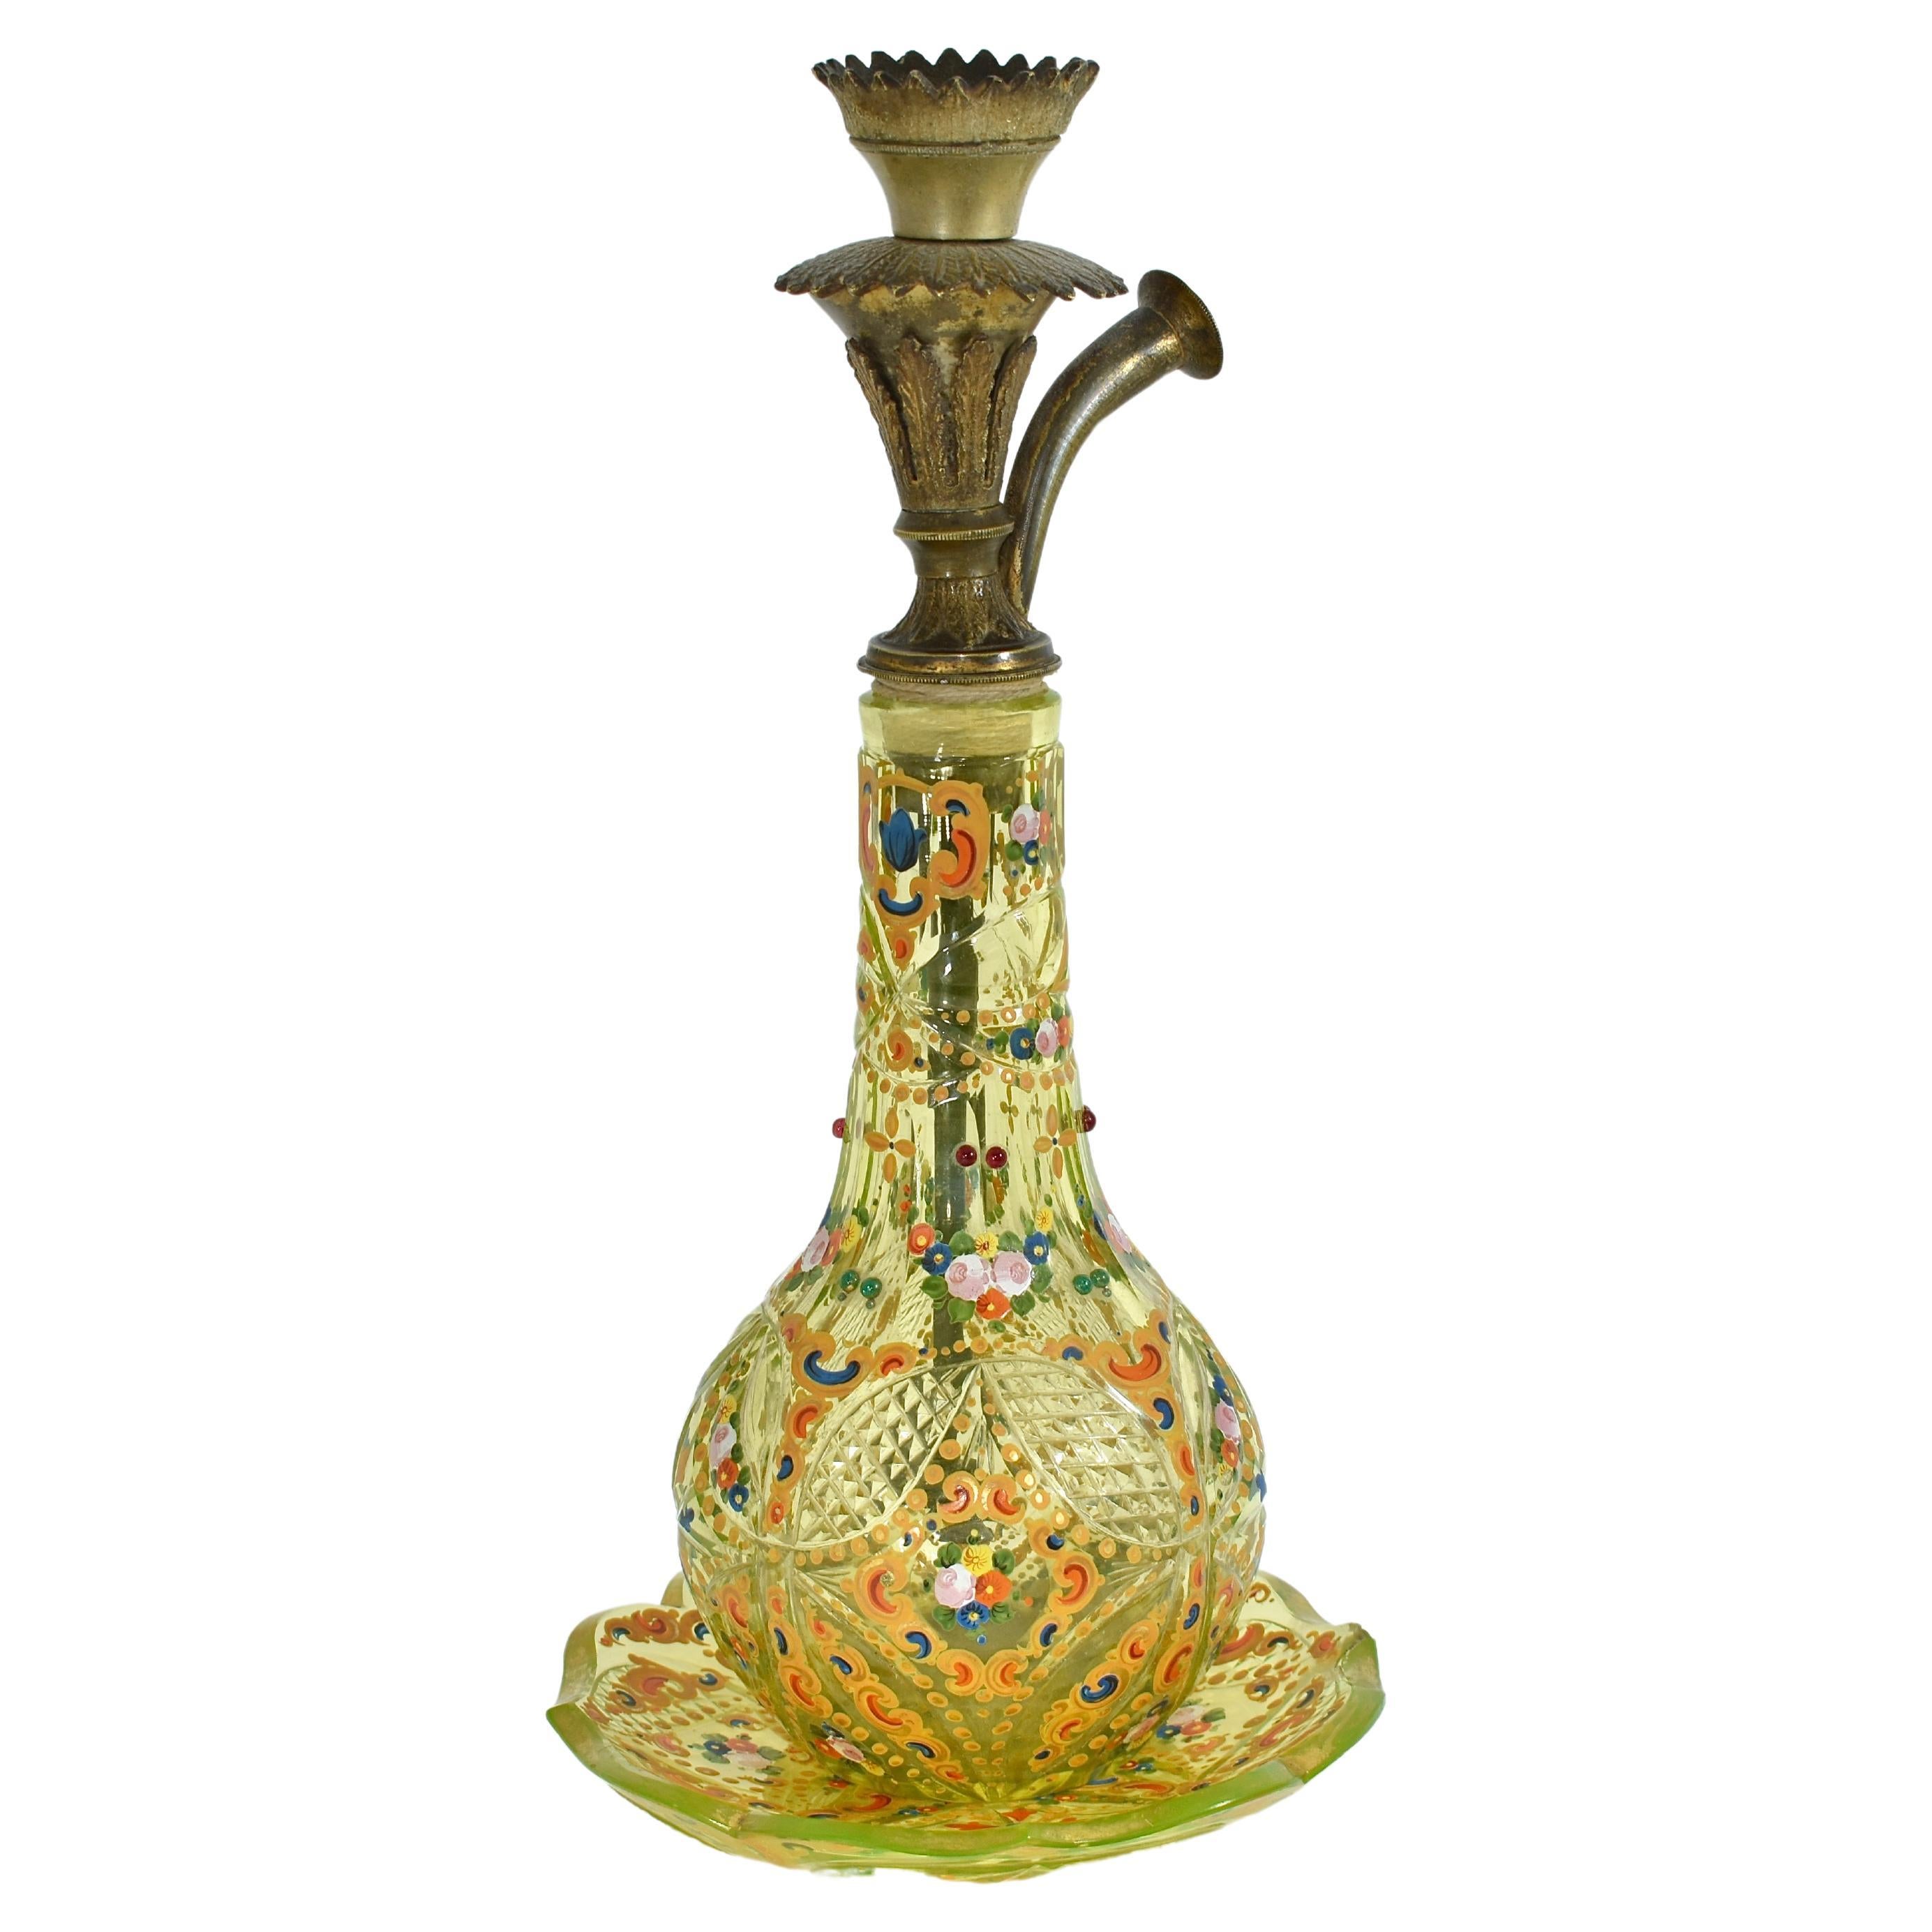 Antique Enamelled Uranium Glass Hookah and Plate, Bohemian for Persian Market For Sale